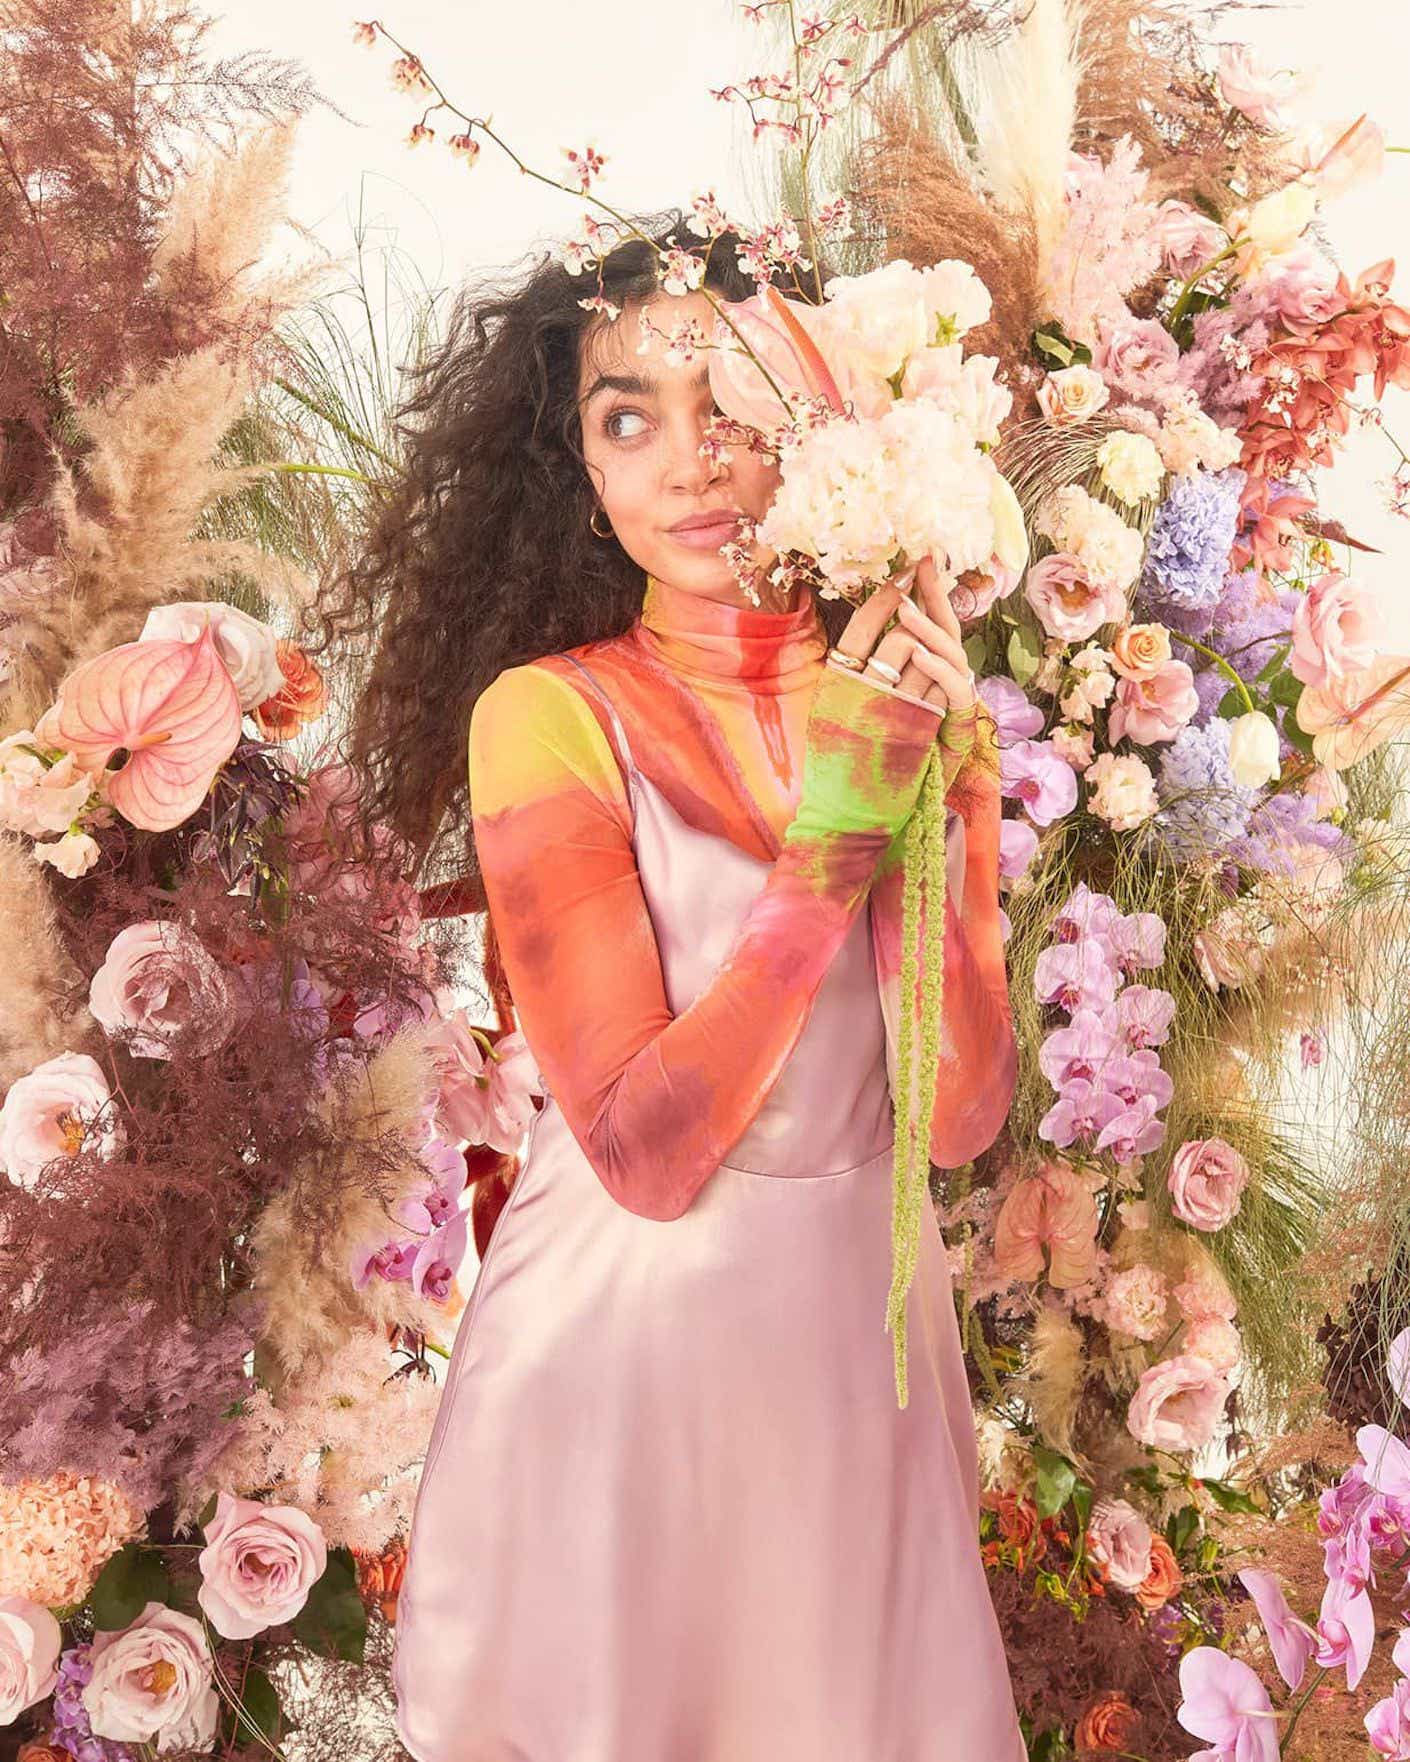 A woman wears silk and poses around flowers